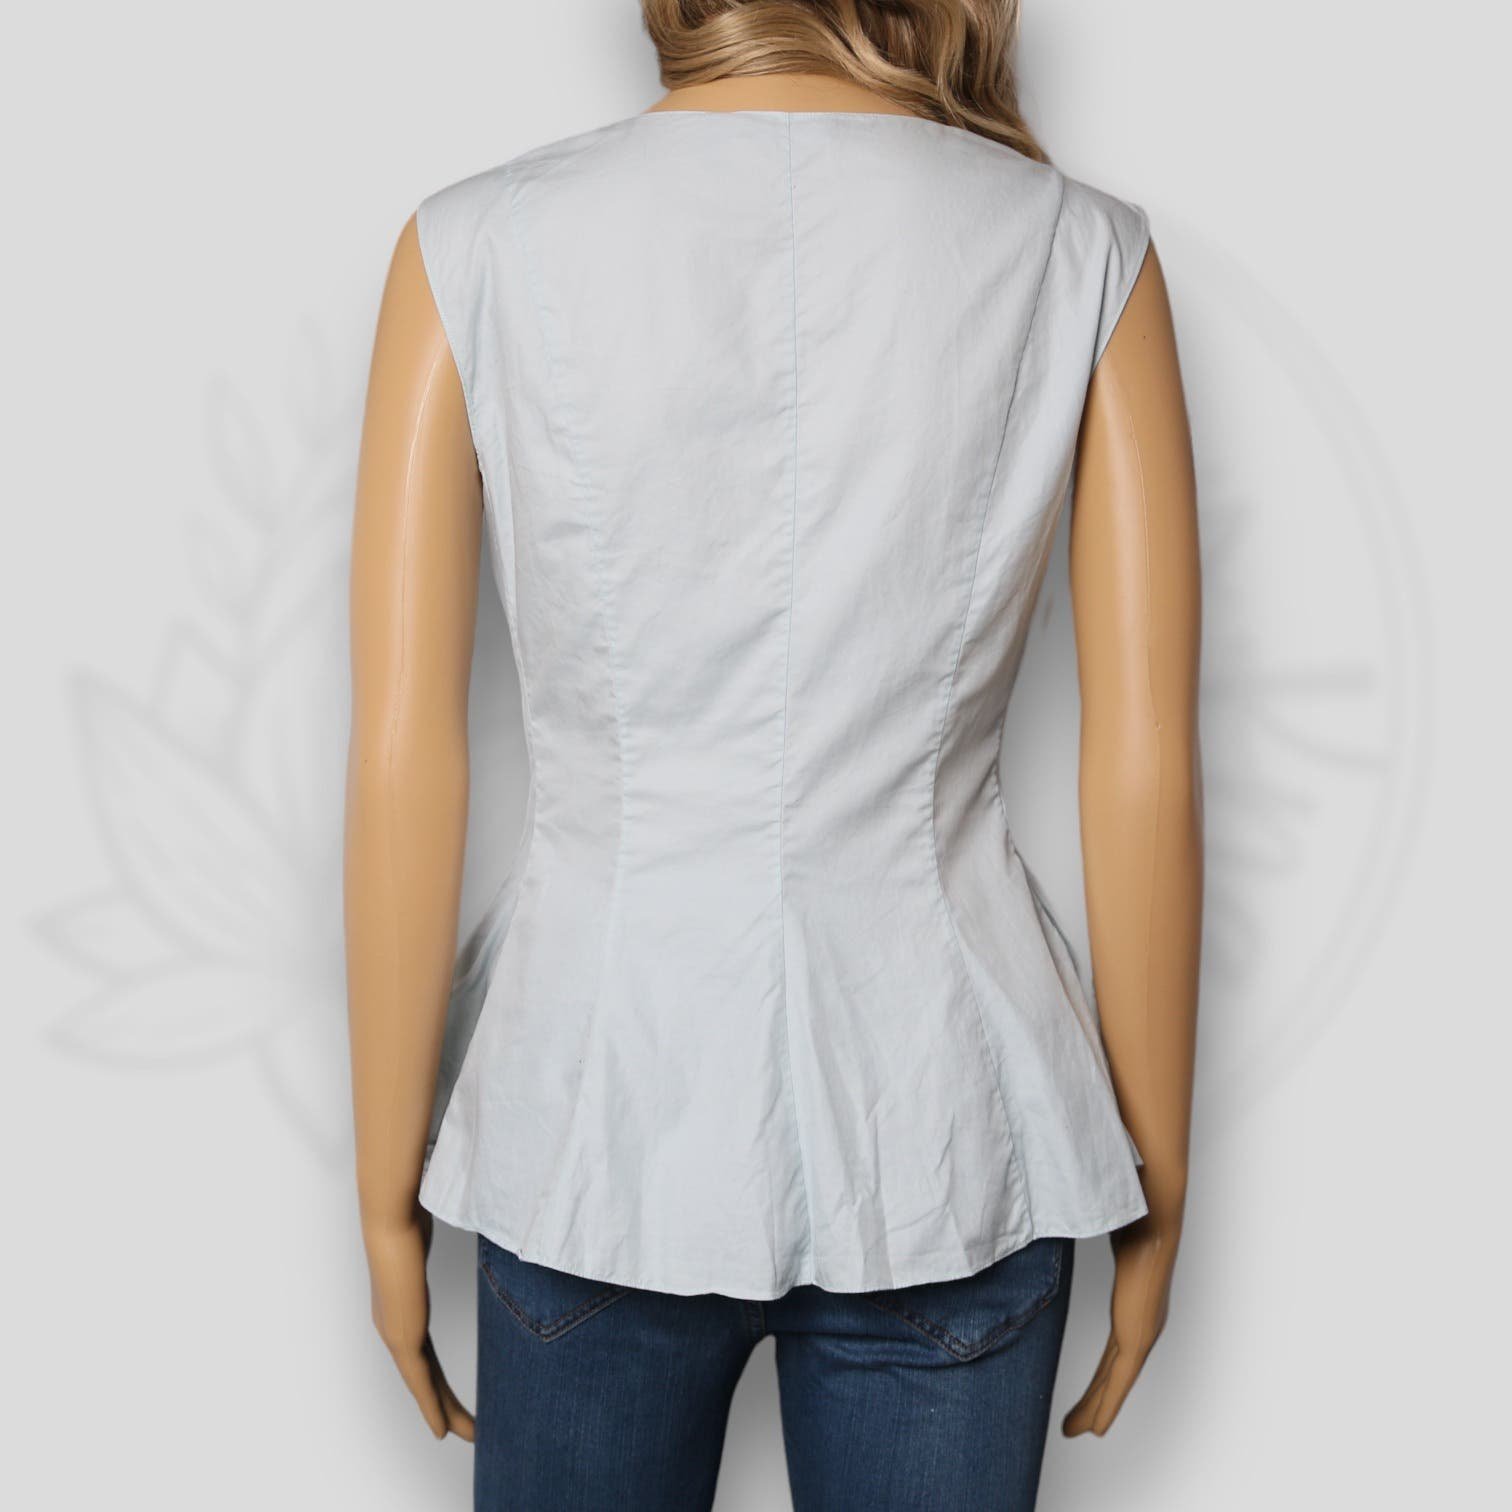 Perfect Theory Perfect Cotton Peplum Blouse in Blue Stream Size S mZerS27wc online store